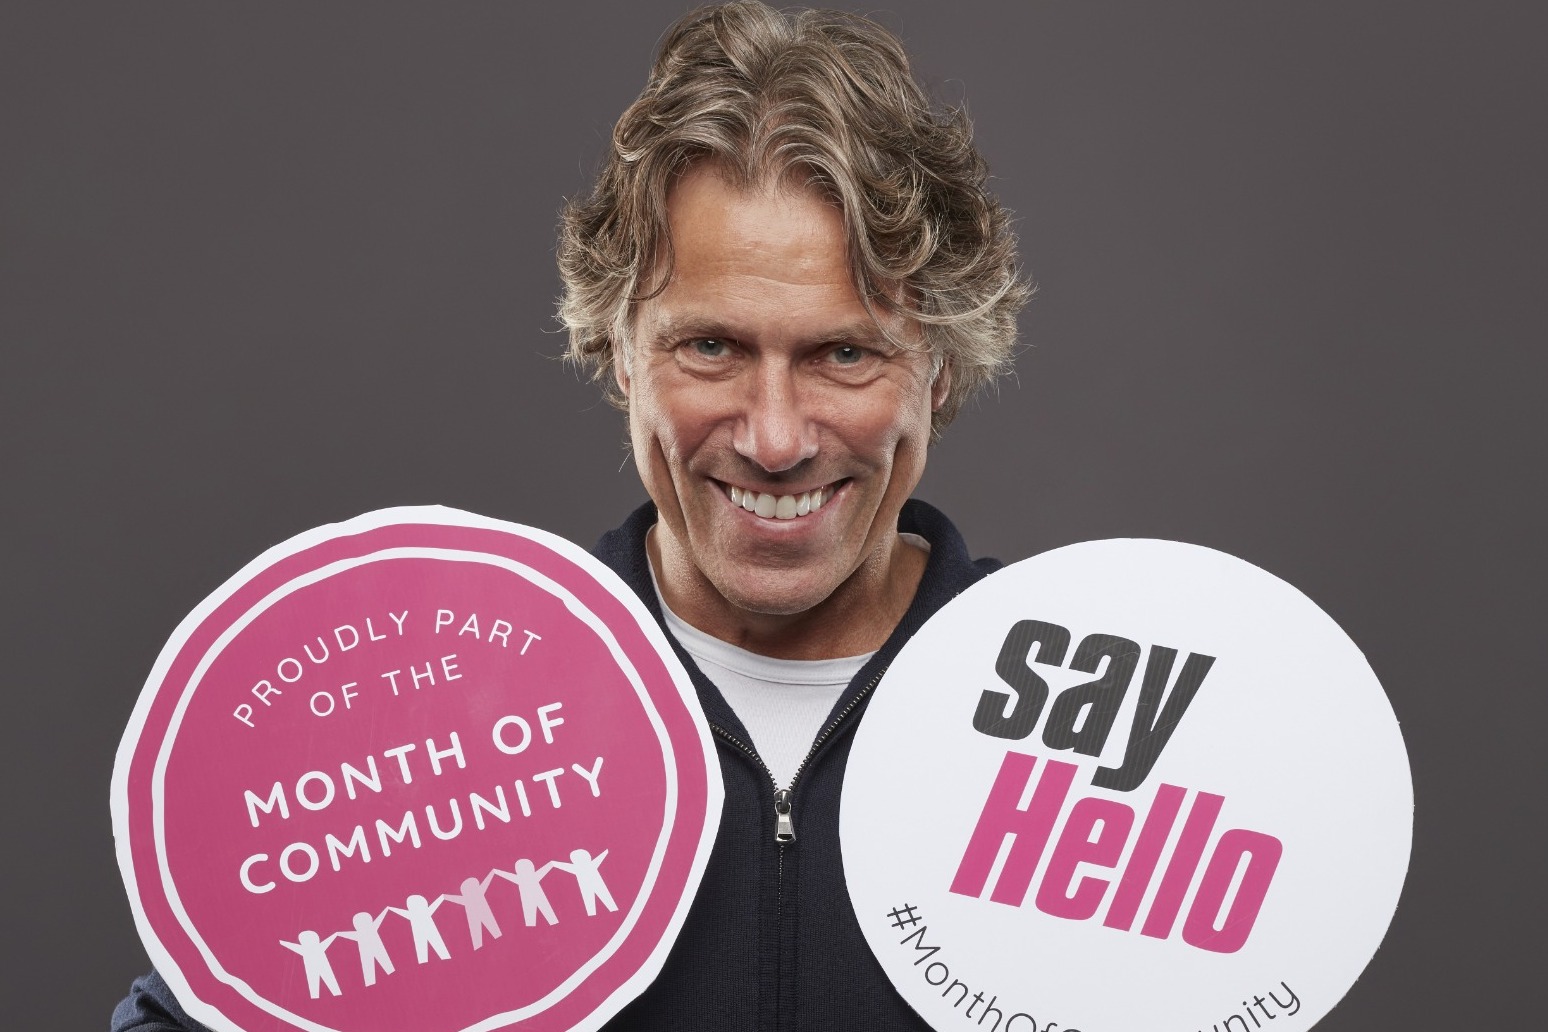 John Bishop hopes to encourage conversation with ‘Say Hello’ campaign 